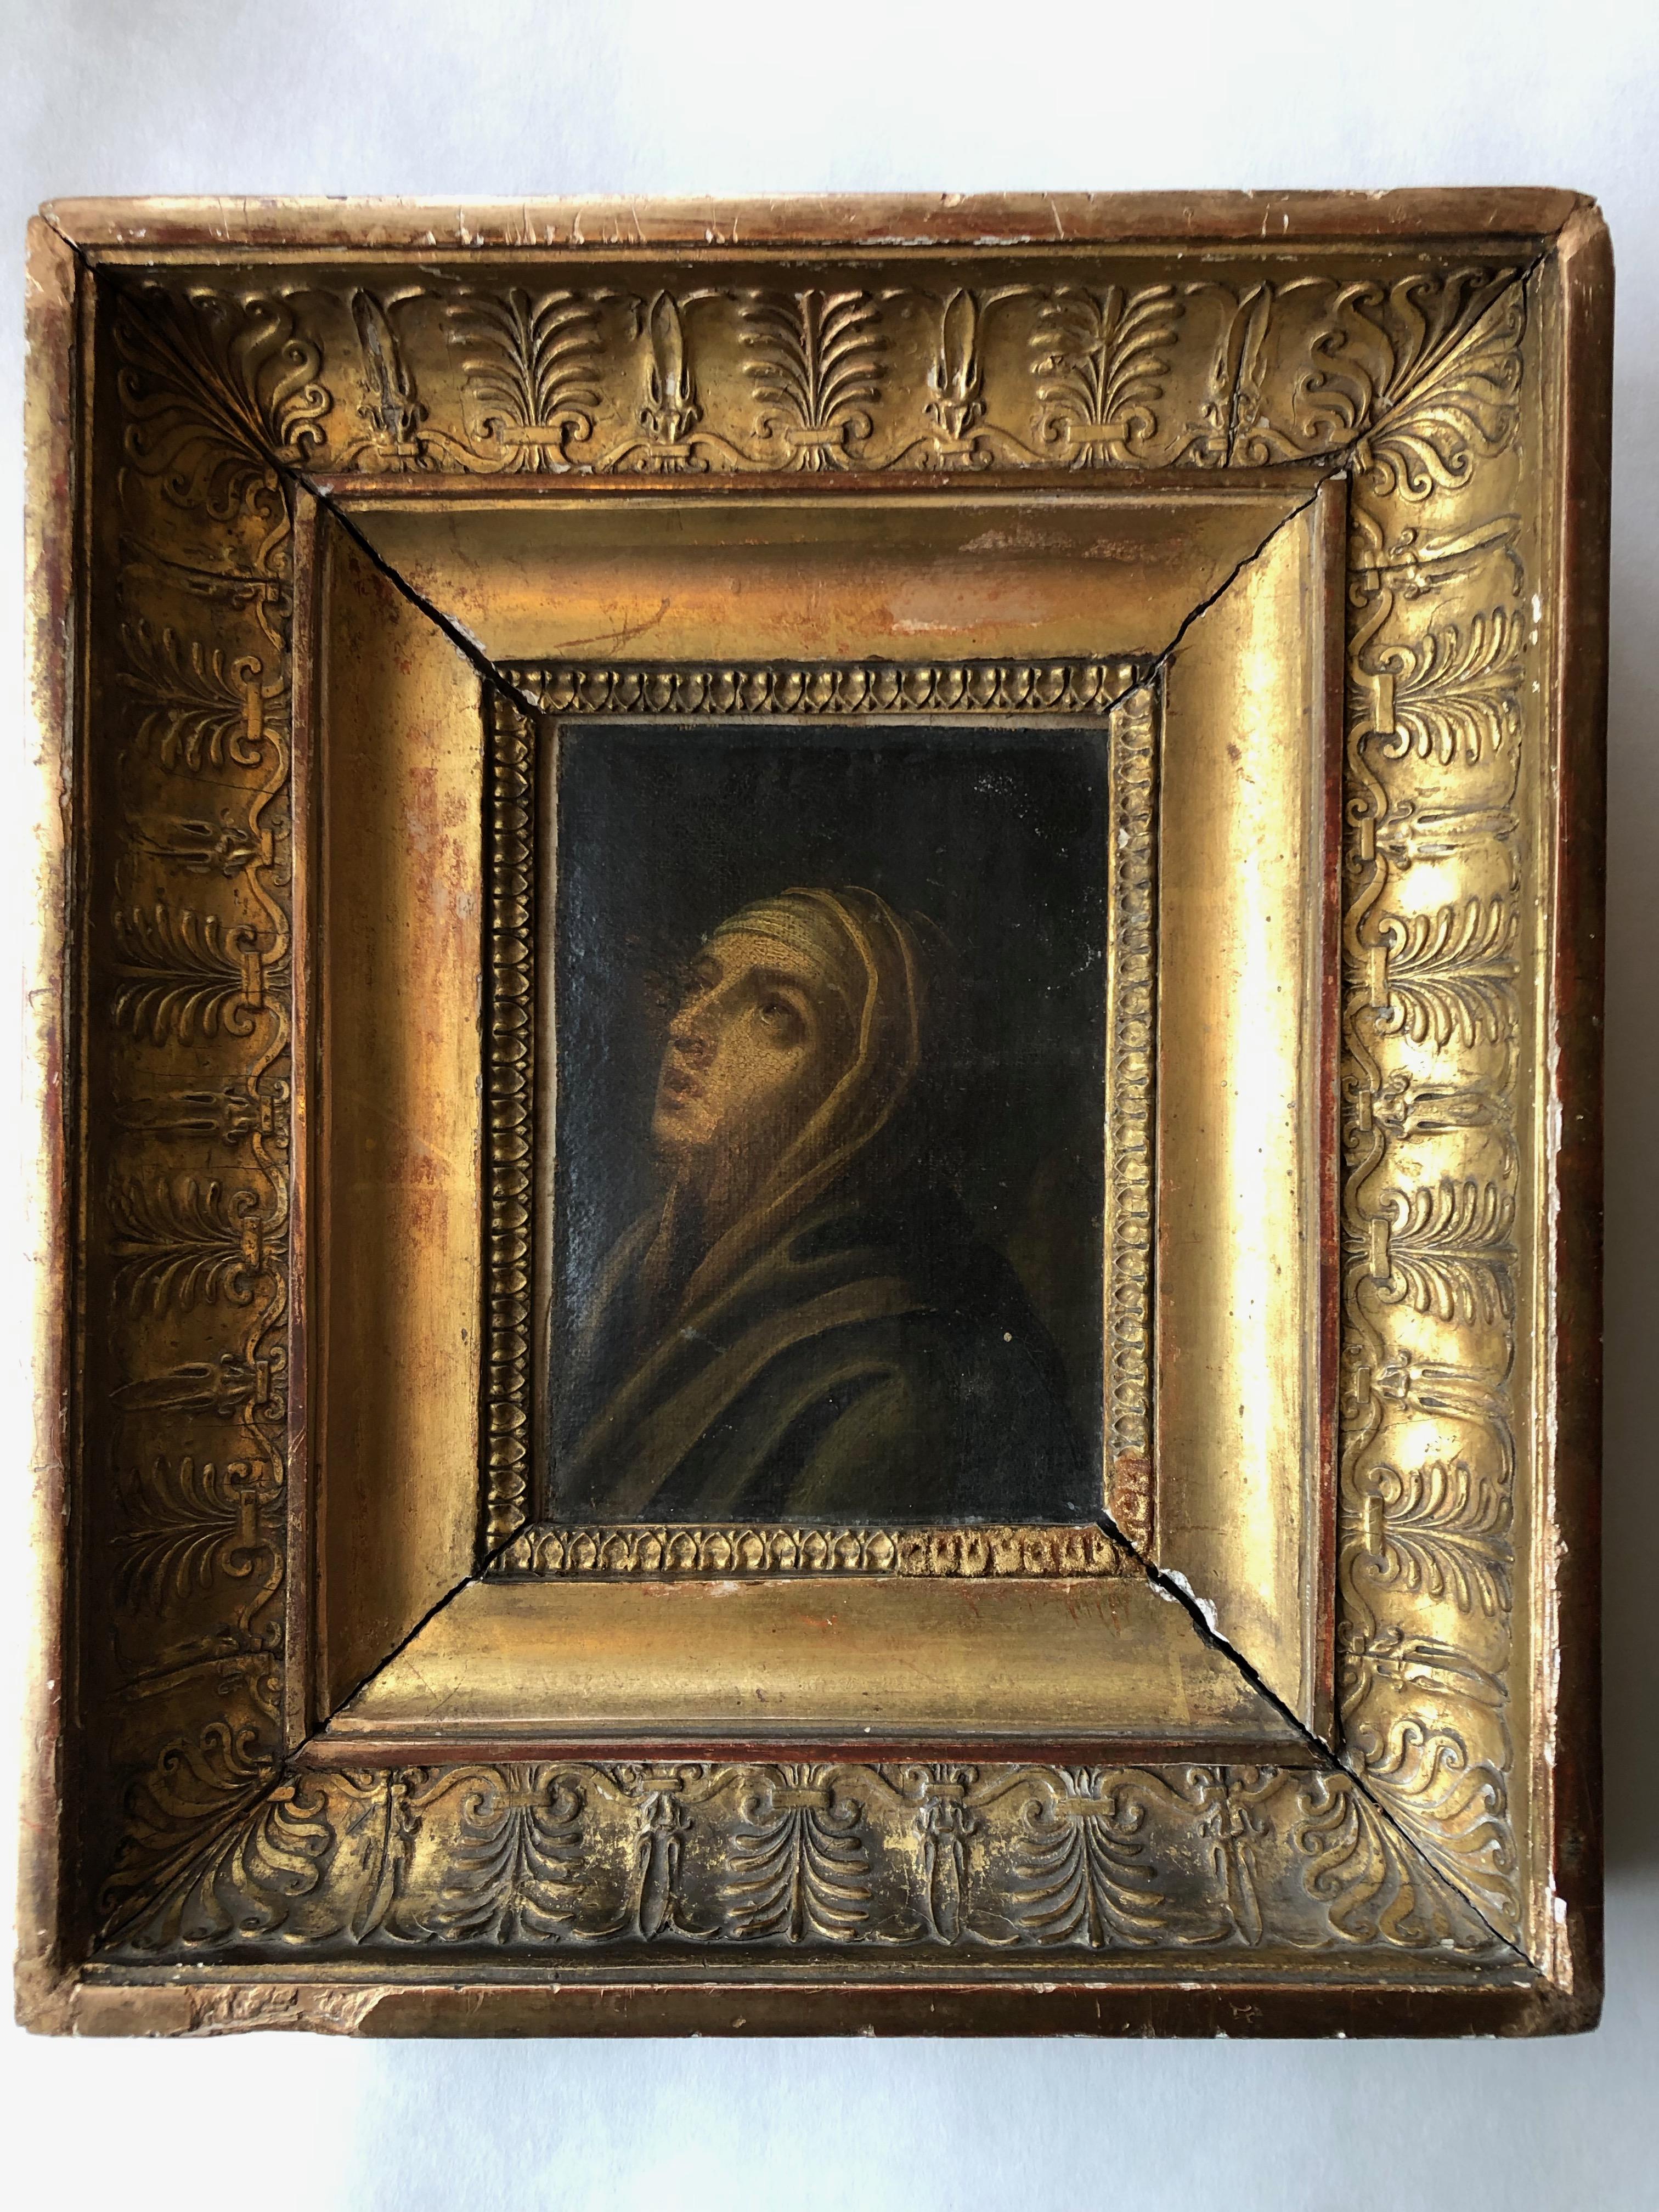 This is a magnificent 1700s oil on canvas painting of a praying woman, or Saint. It is beautifully painted in exquisite detail. The substantial carved wood gilded frame is equally amazing with its intricate and various scroll designs. The solid wood